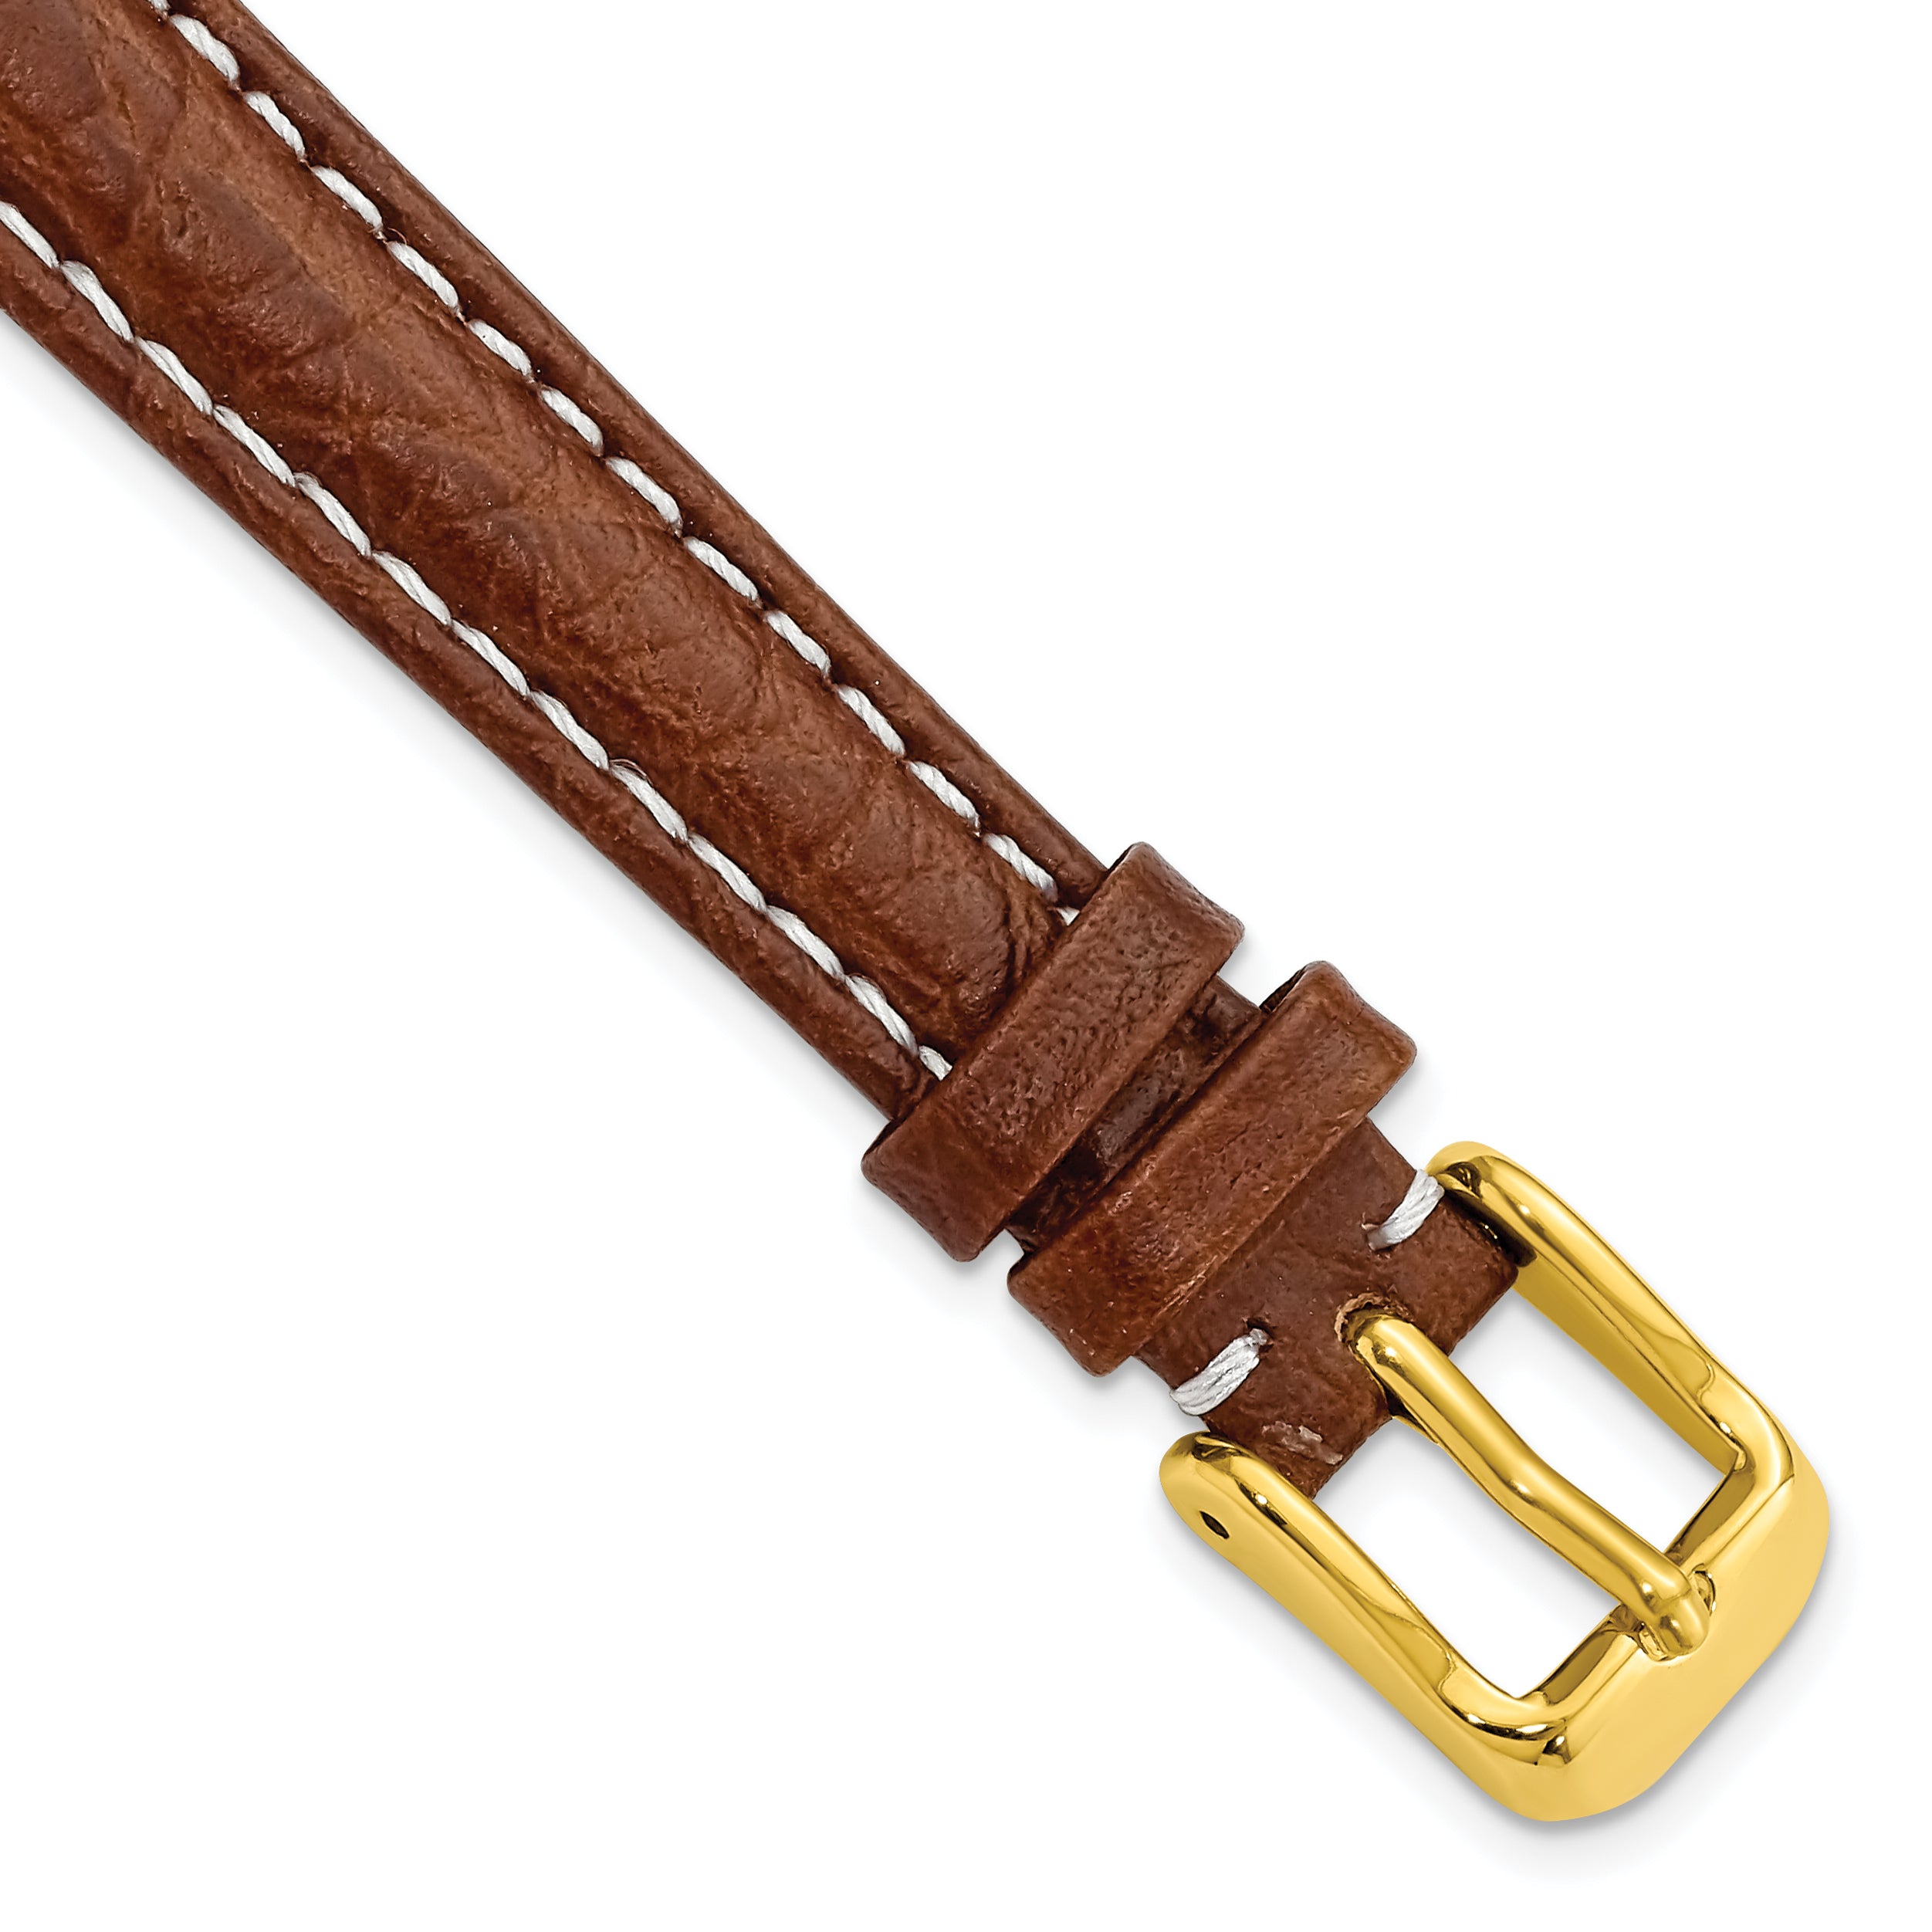 DeBeer 12mm Havana Sport Leather with White Stitching and Gold-tone Buckle 6.75 inch Watch Band